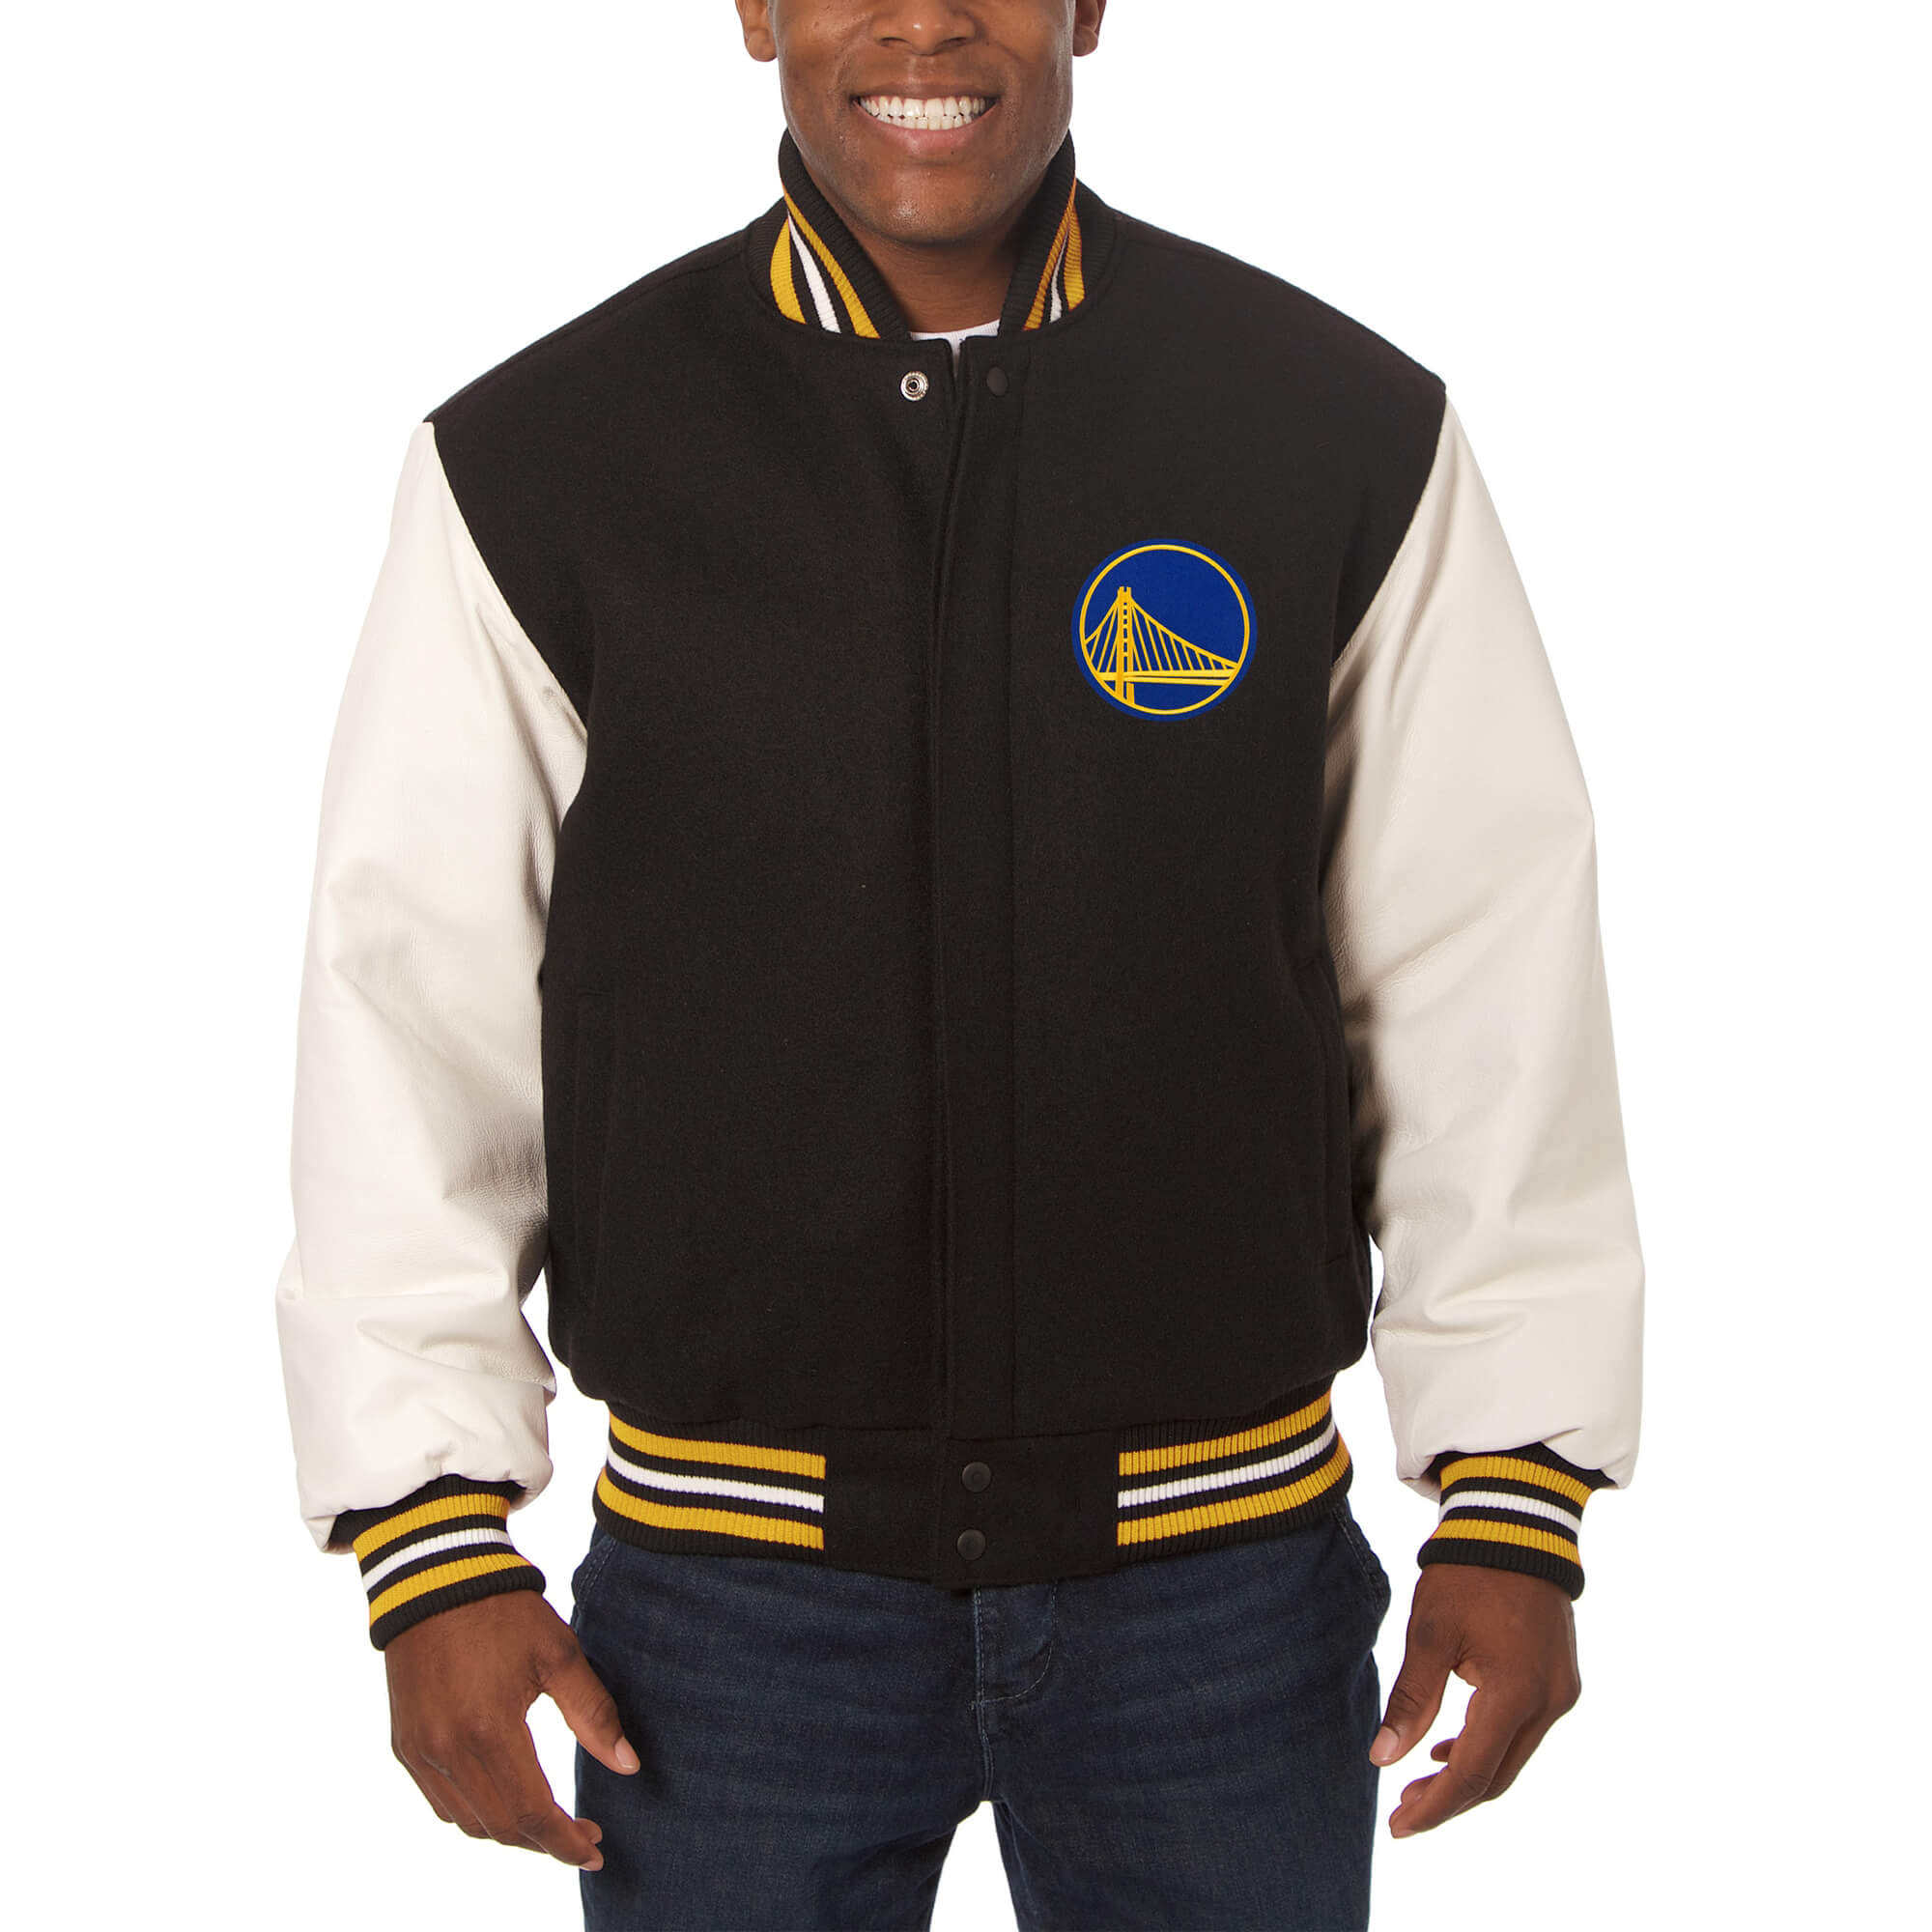 Mens NBA Multi Team Patch Varsity Jacket Black / Wool with Leather / S